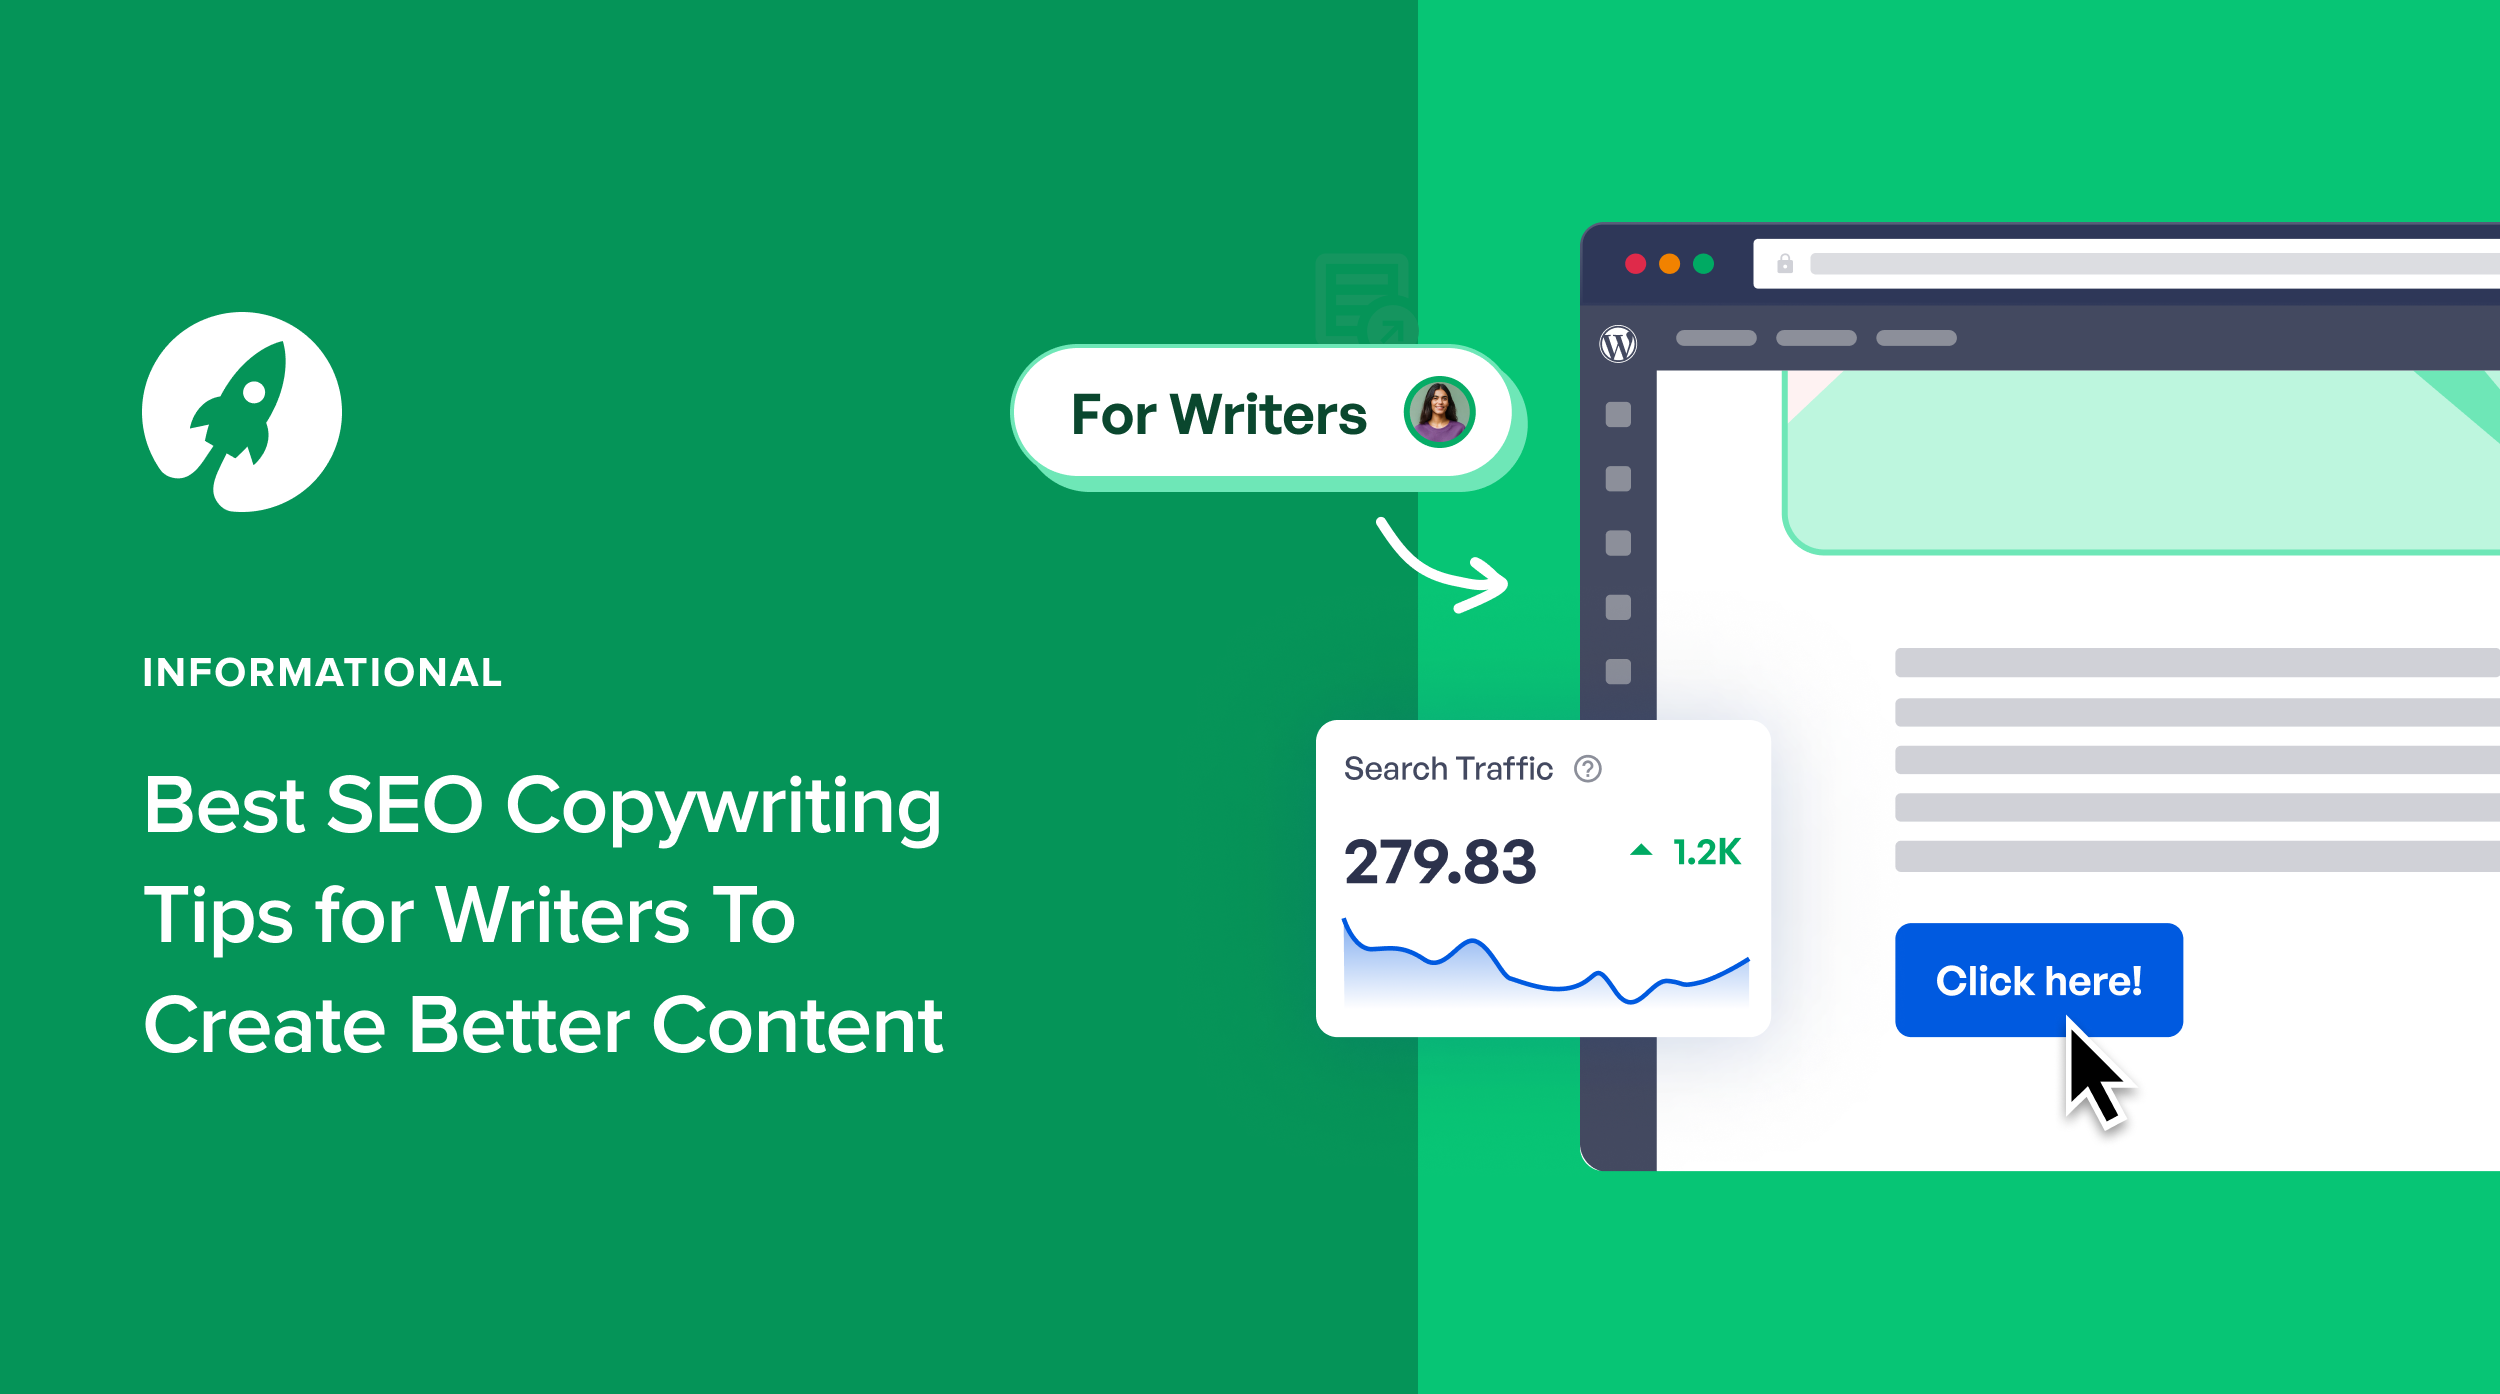 9 SEO Copywriting Tips for Writers To Create Better Content